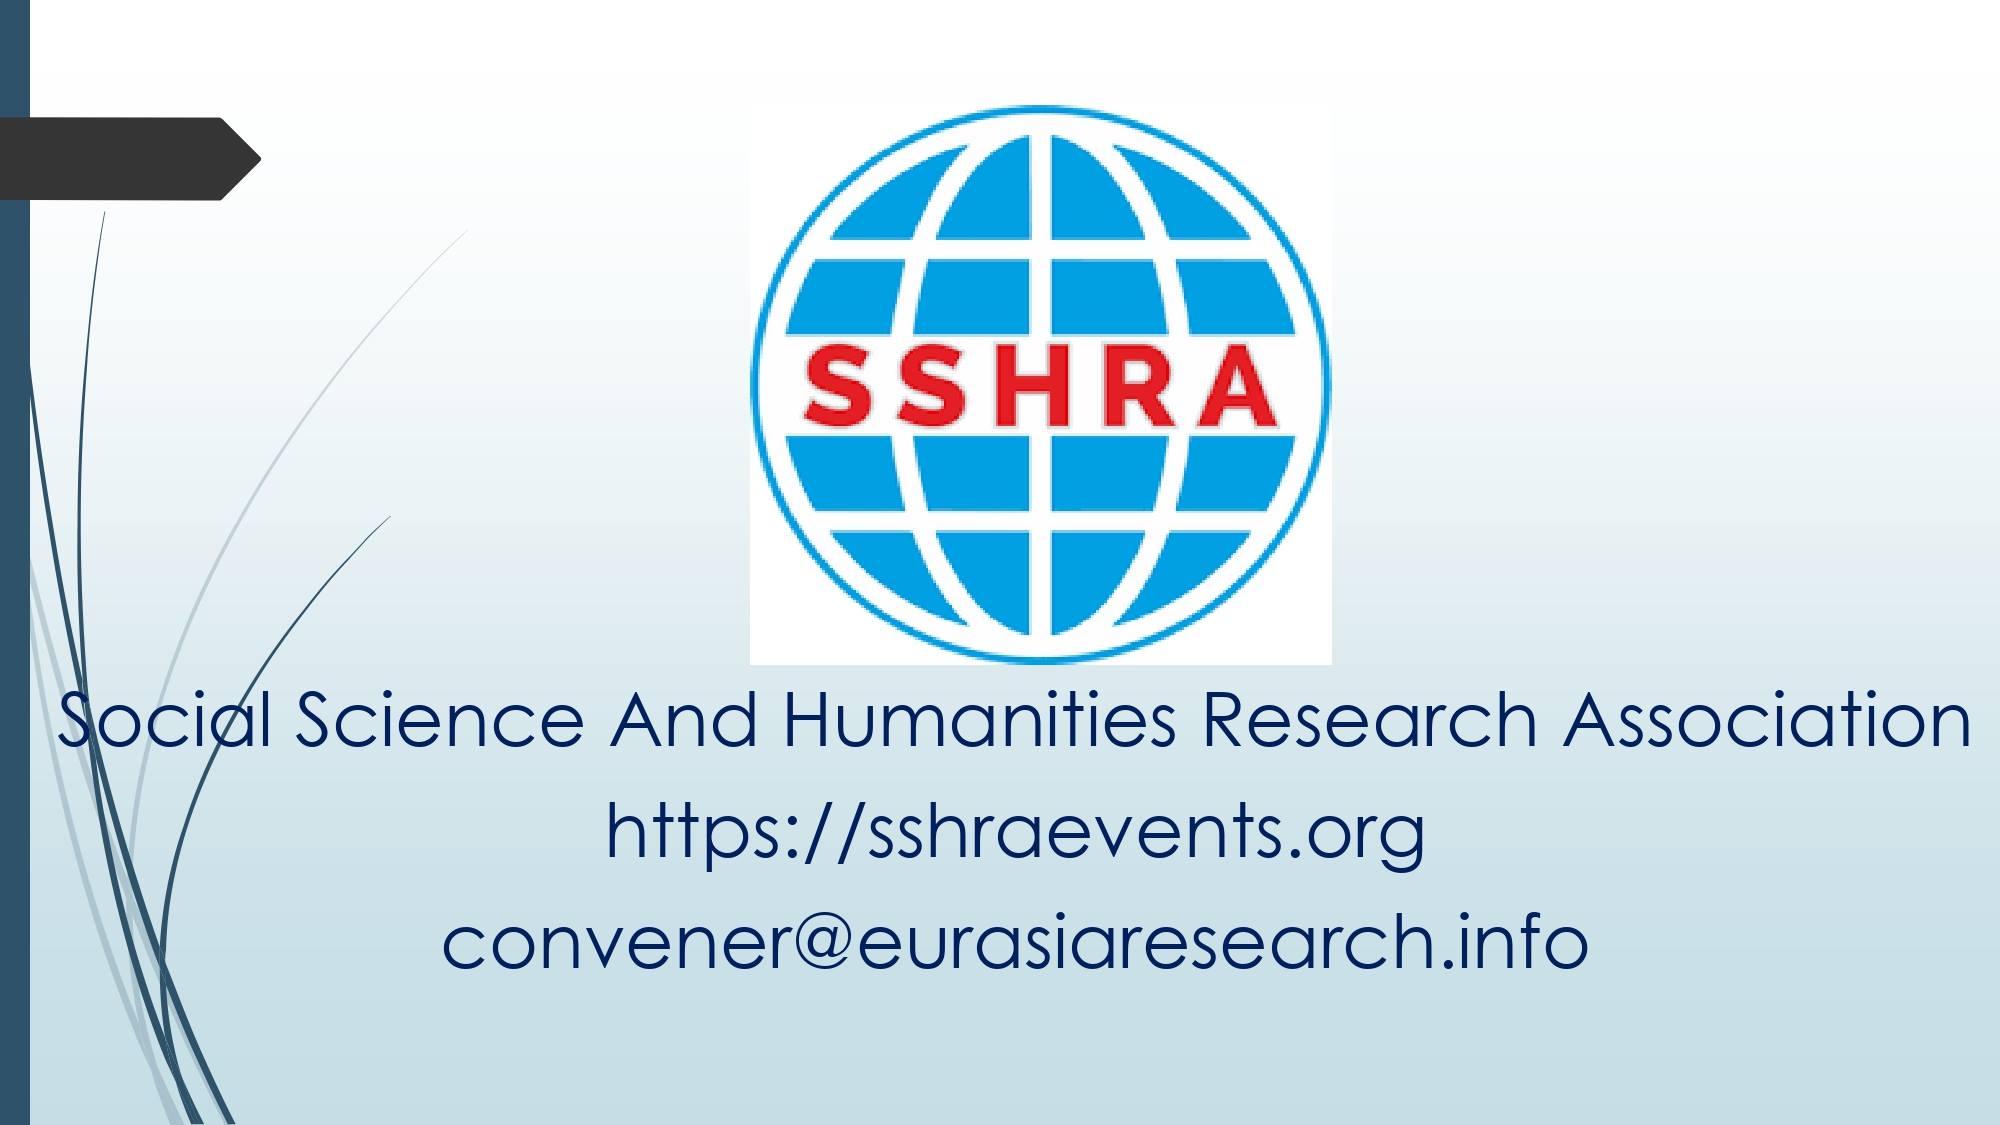 4th Budapest – International Conference on Social Science & Humanities (ICSSH), 14-15 July 2021, Budapest, Hungary